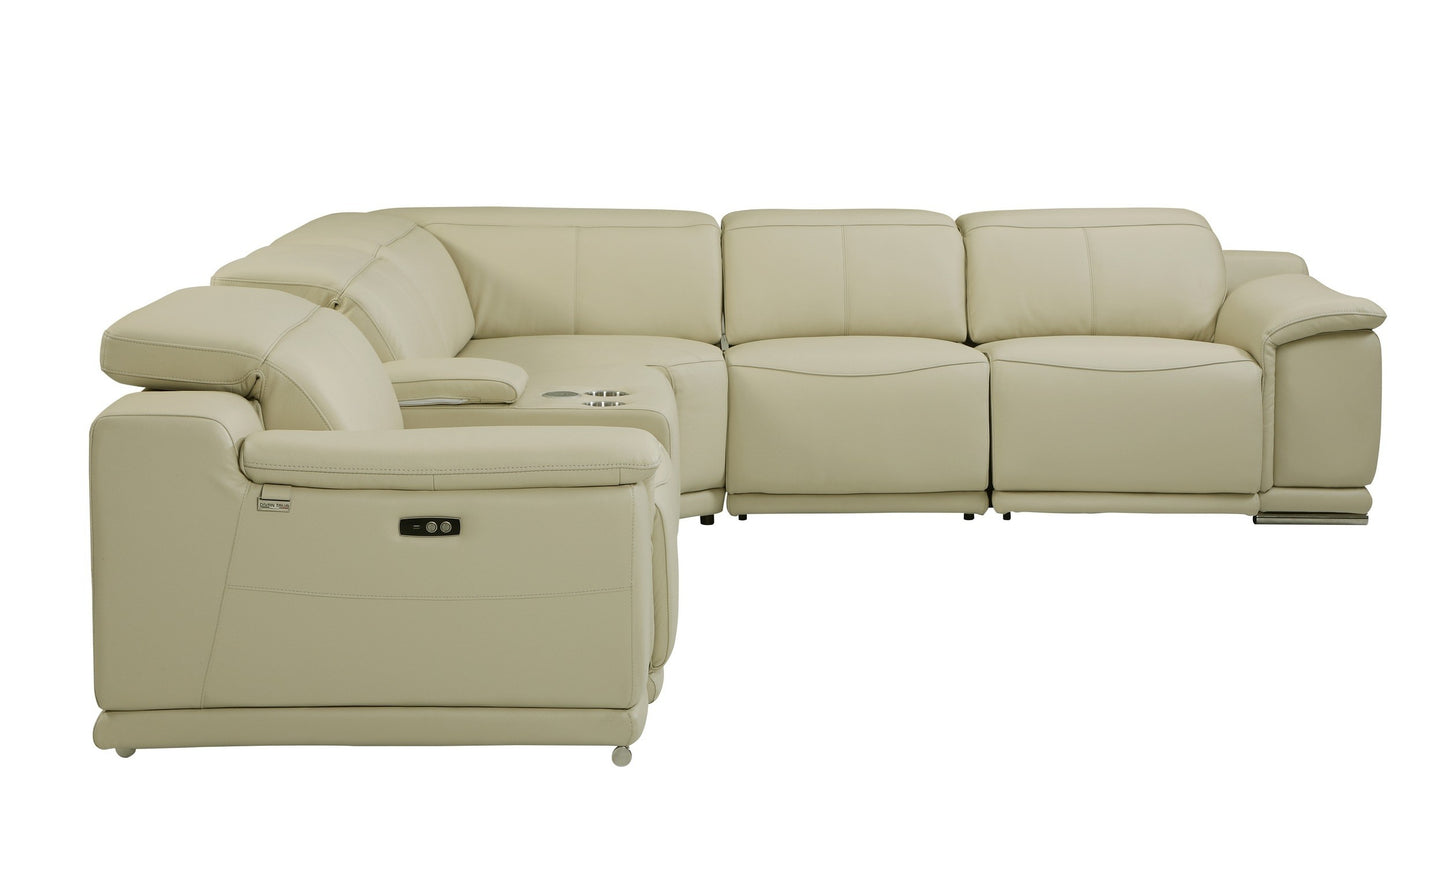 Alanzo 6PC Modular Italian Leather Power Reclining Sectional TAUPE